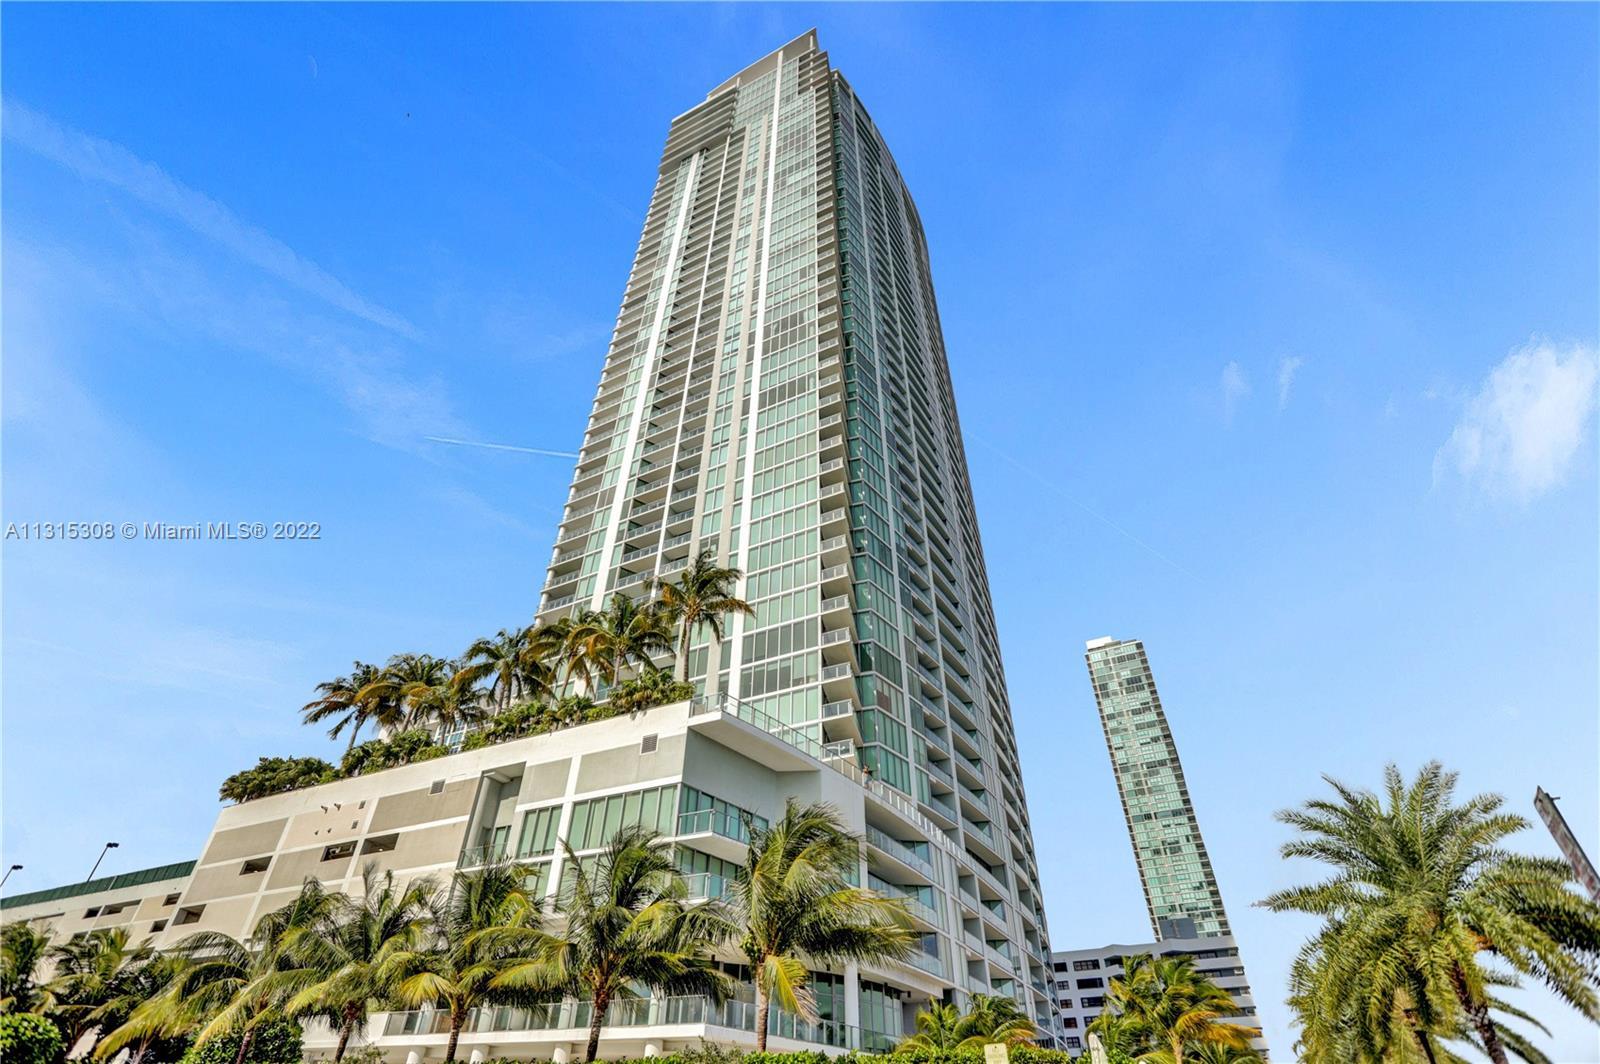 BREATHTAKING - Biscayne Beach (Edgewater) Direct Bay View from every room. Amazing 1 Bedroom (+ Den)